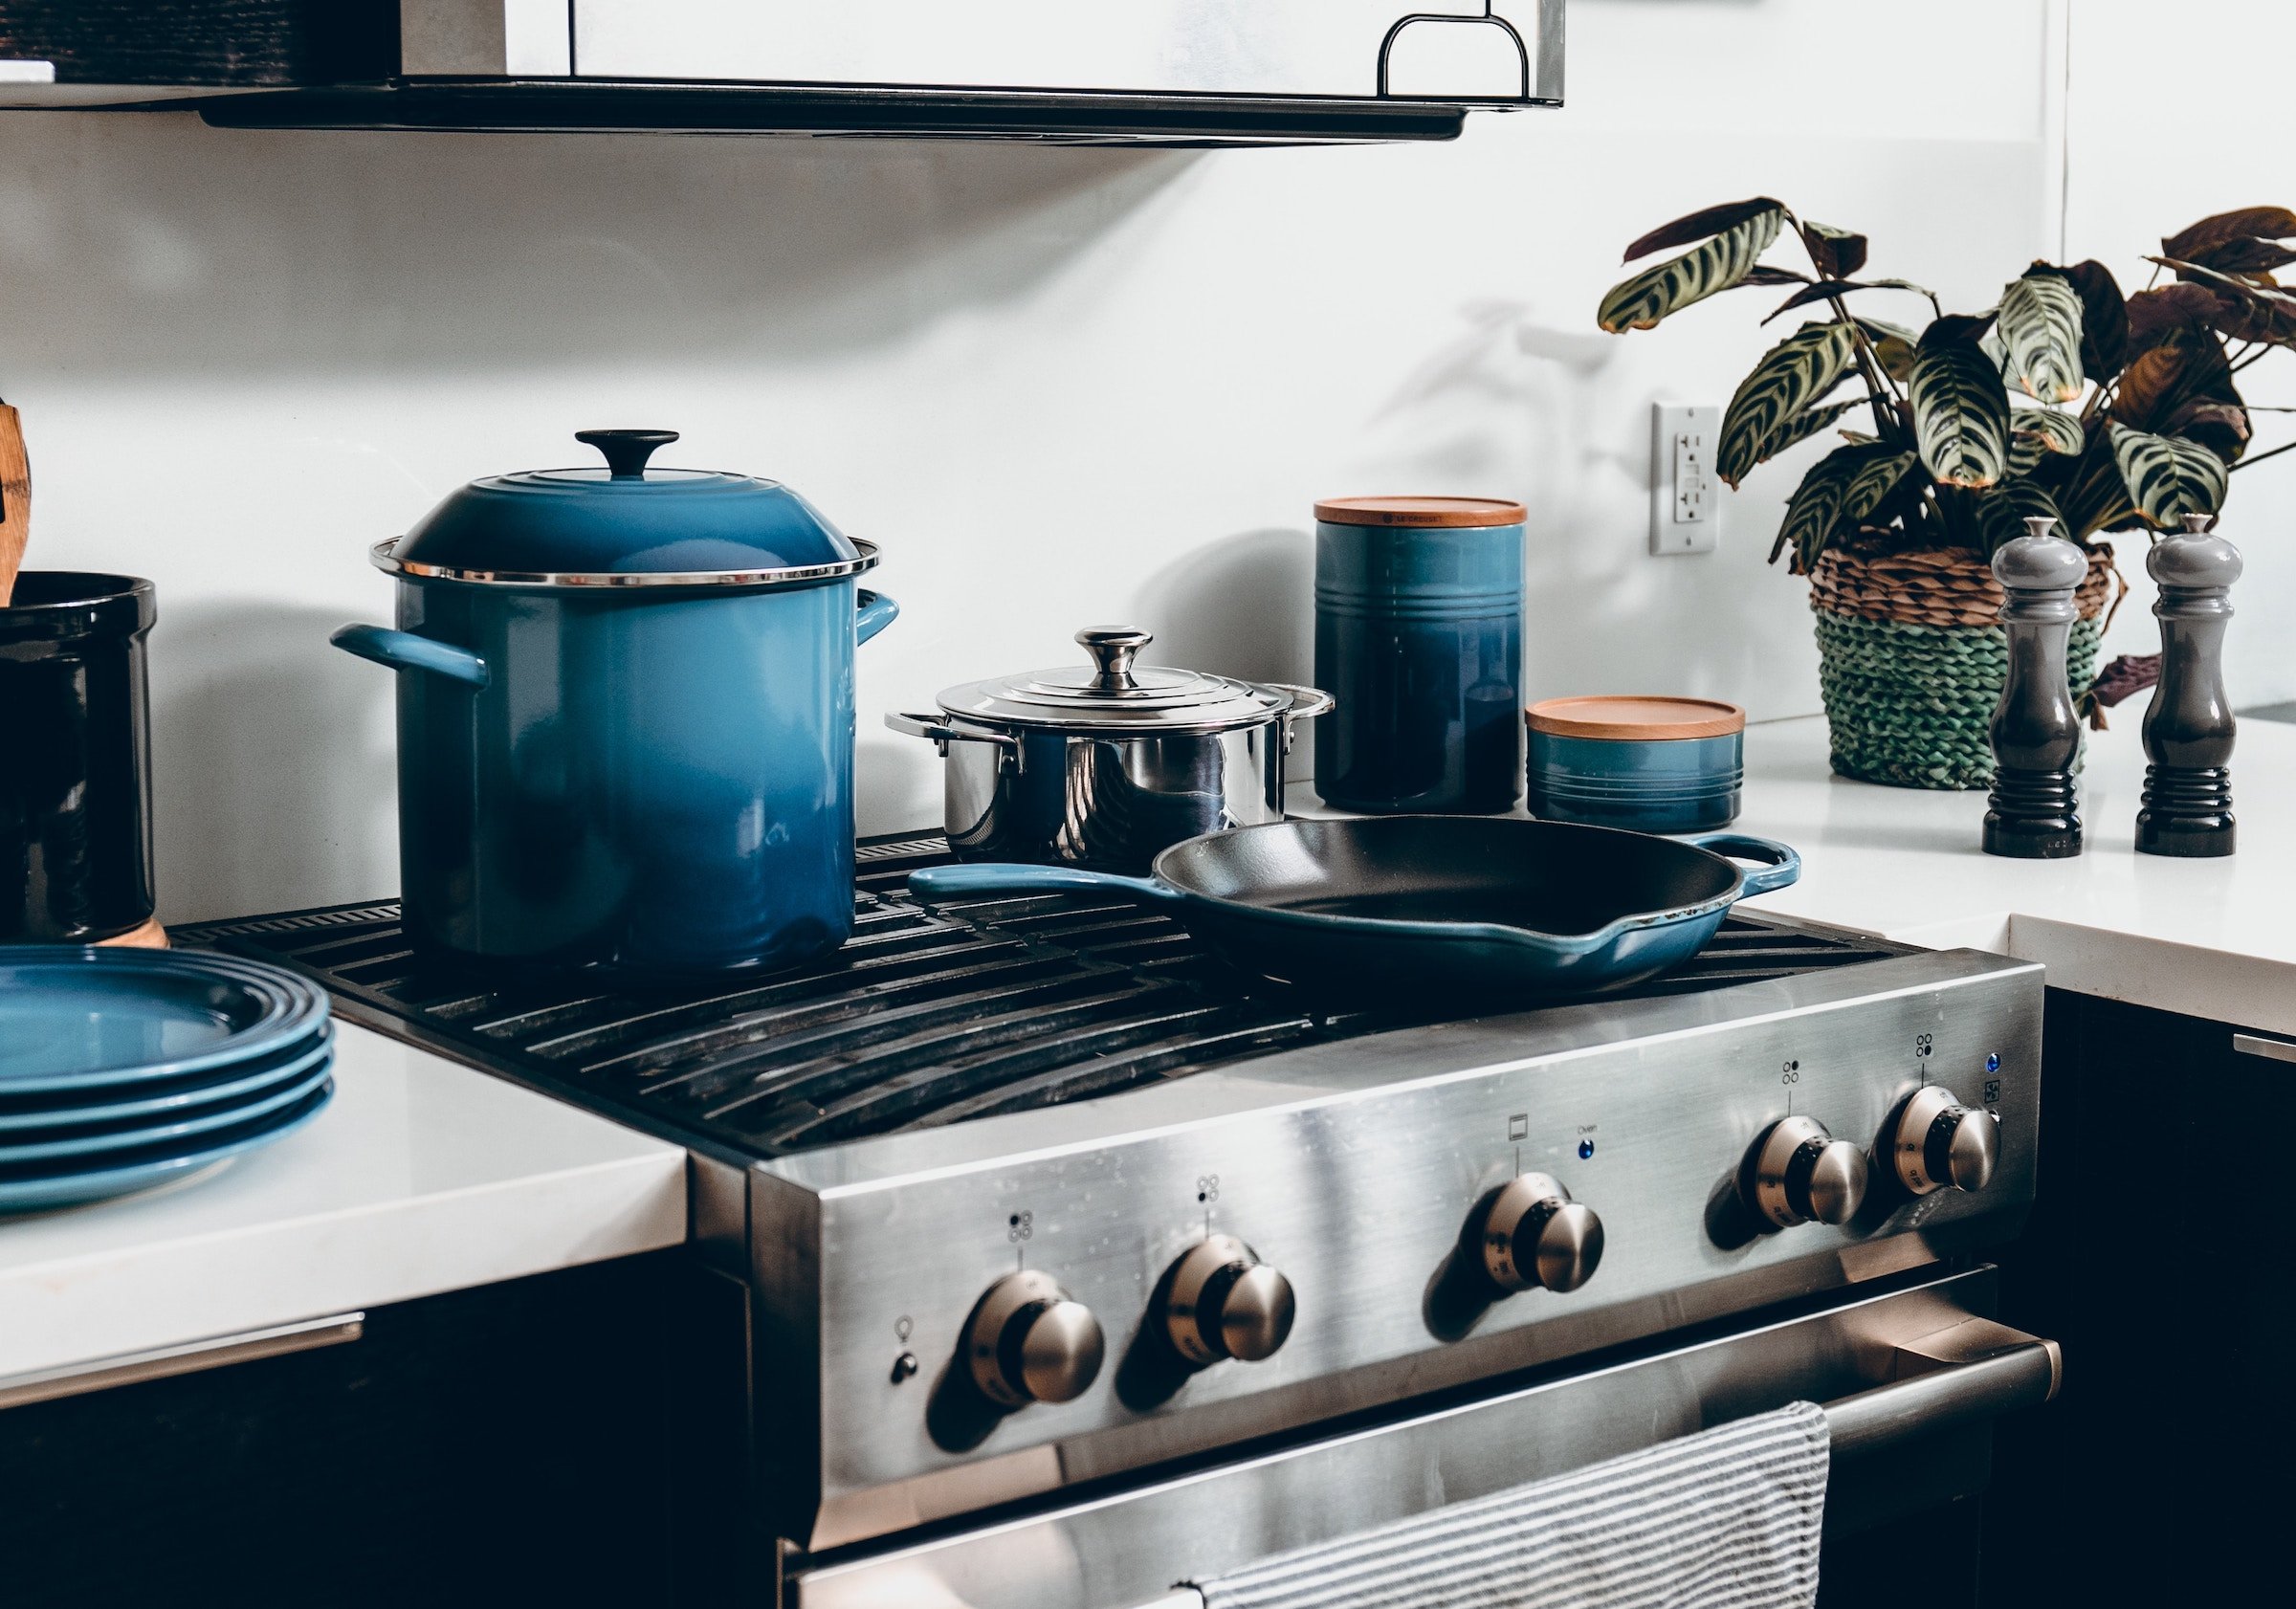 The Best Black Friday Appliance Deals of 2019